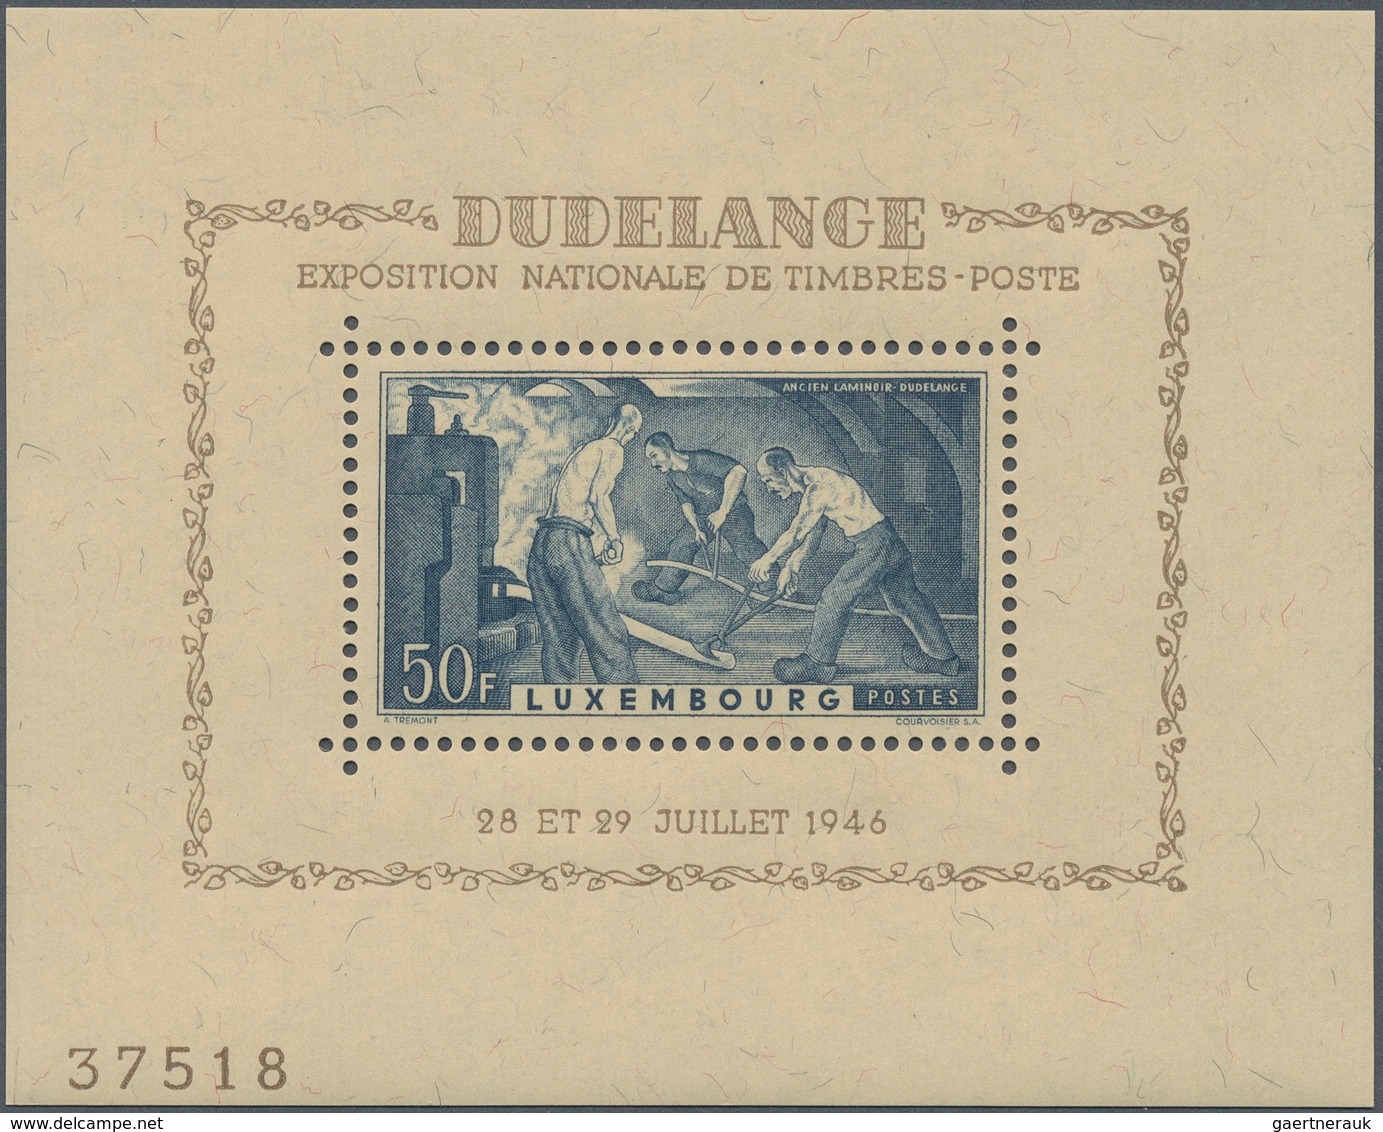 Luxemburg: 1939/1990, duplicated accumulation of the MINIATURE SHEETS in different quantities incl.